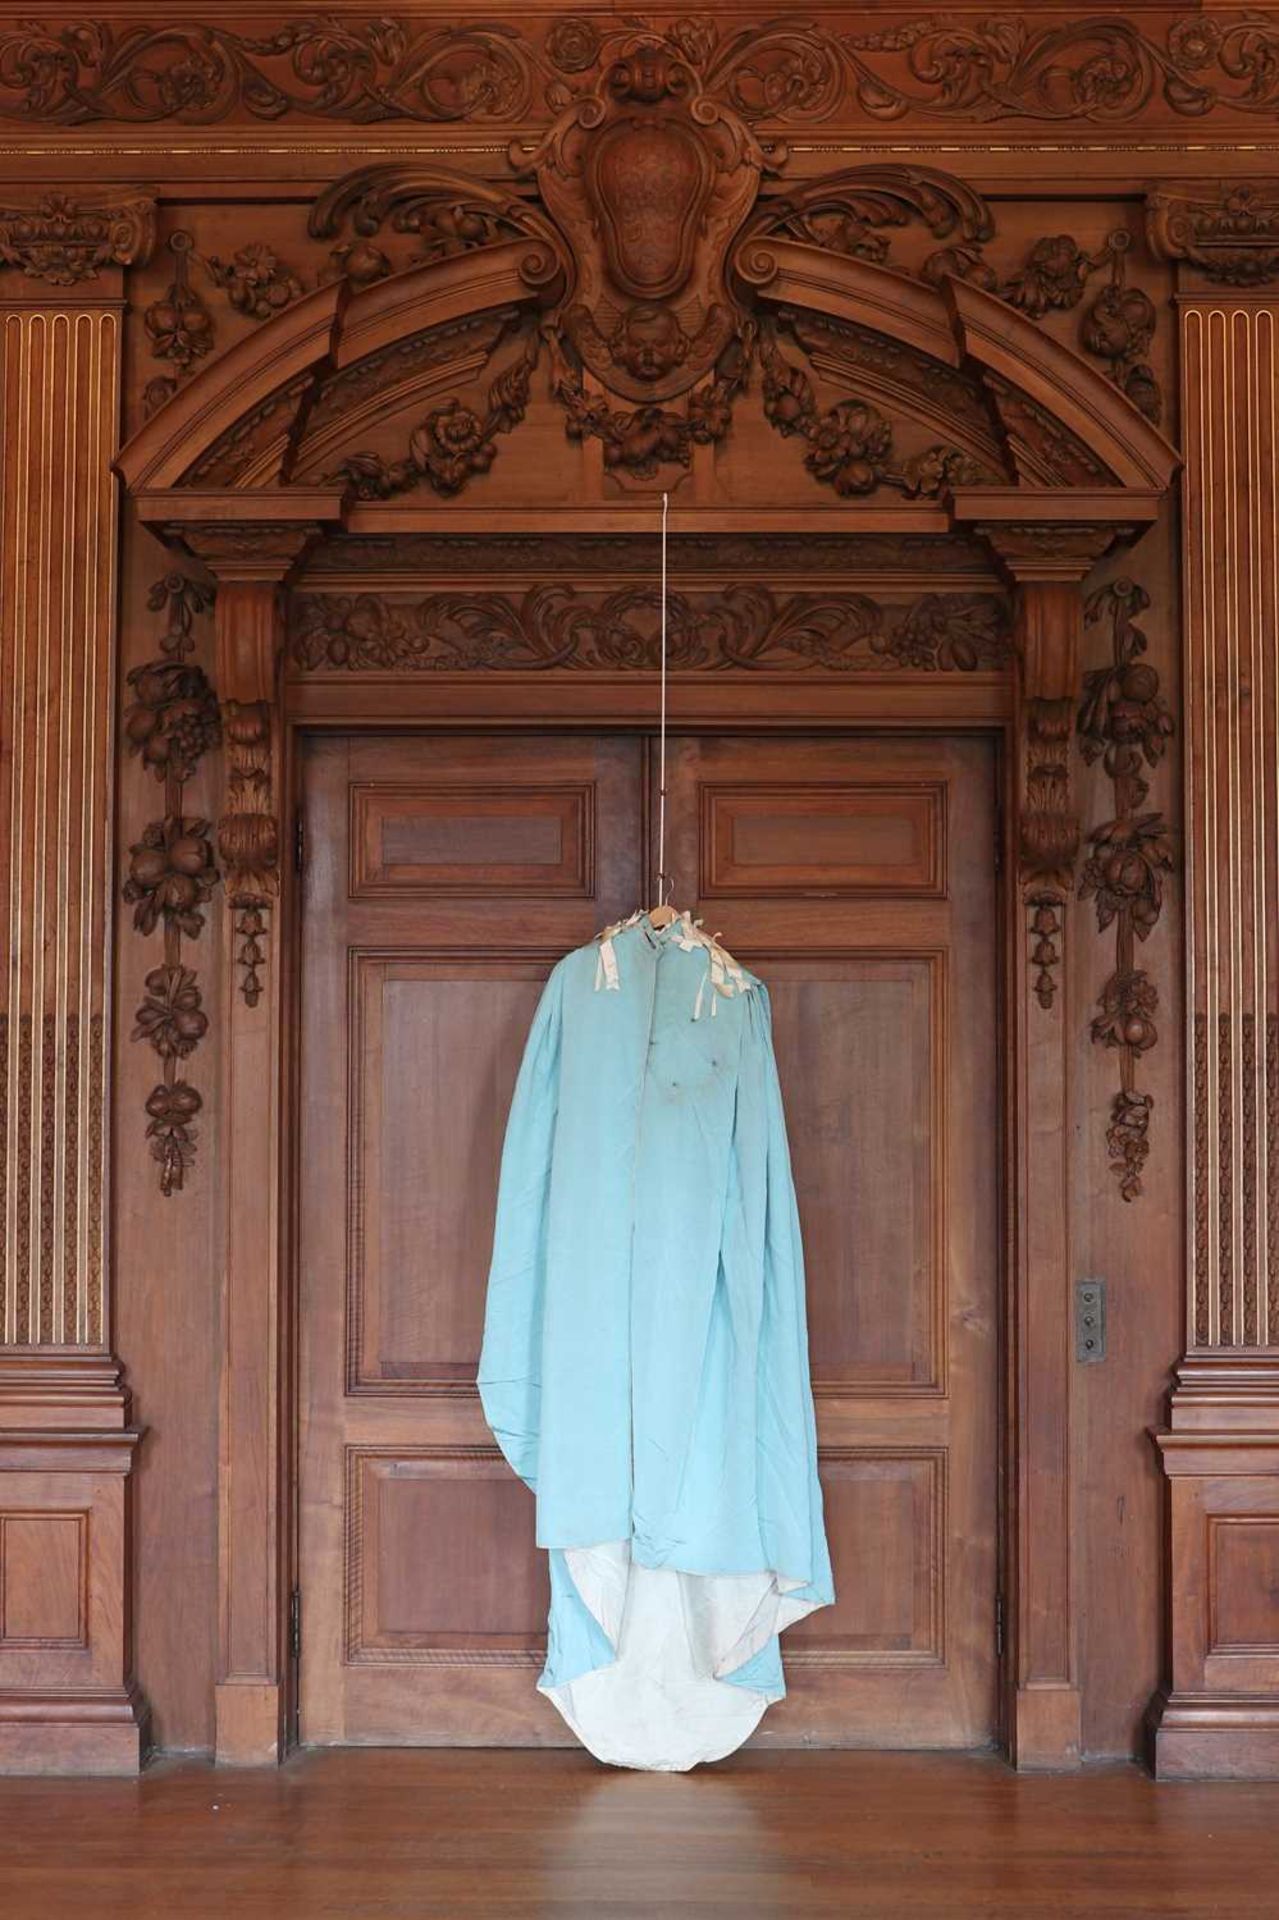 ☘ A ceremonial robe of the Grand Order of the Knights of St Patrick,